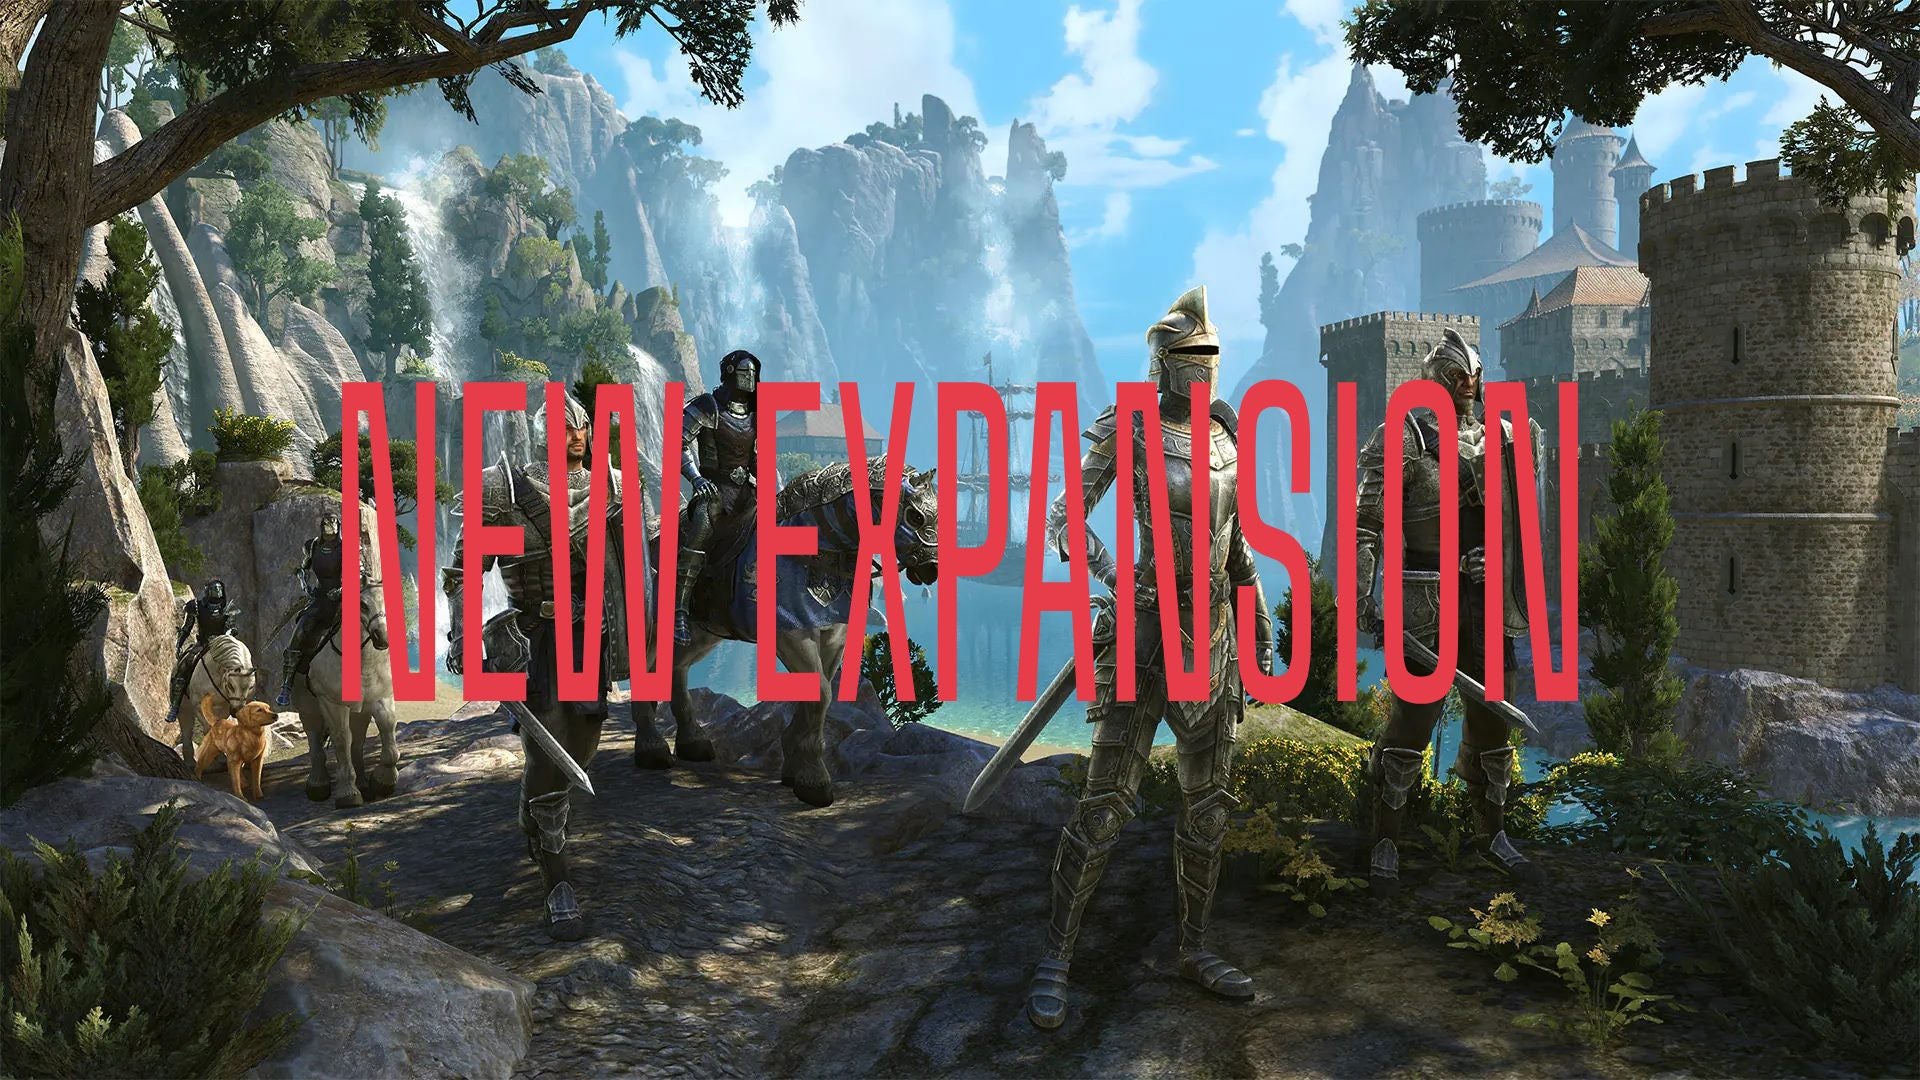 Image for Elder Scrolls Online Legacy of the Bretons trailers set up the MMO's future